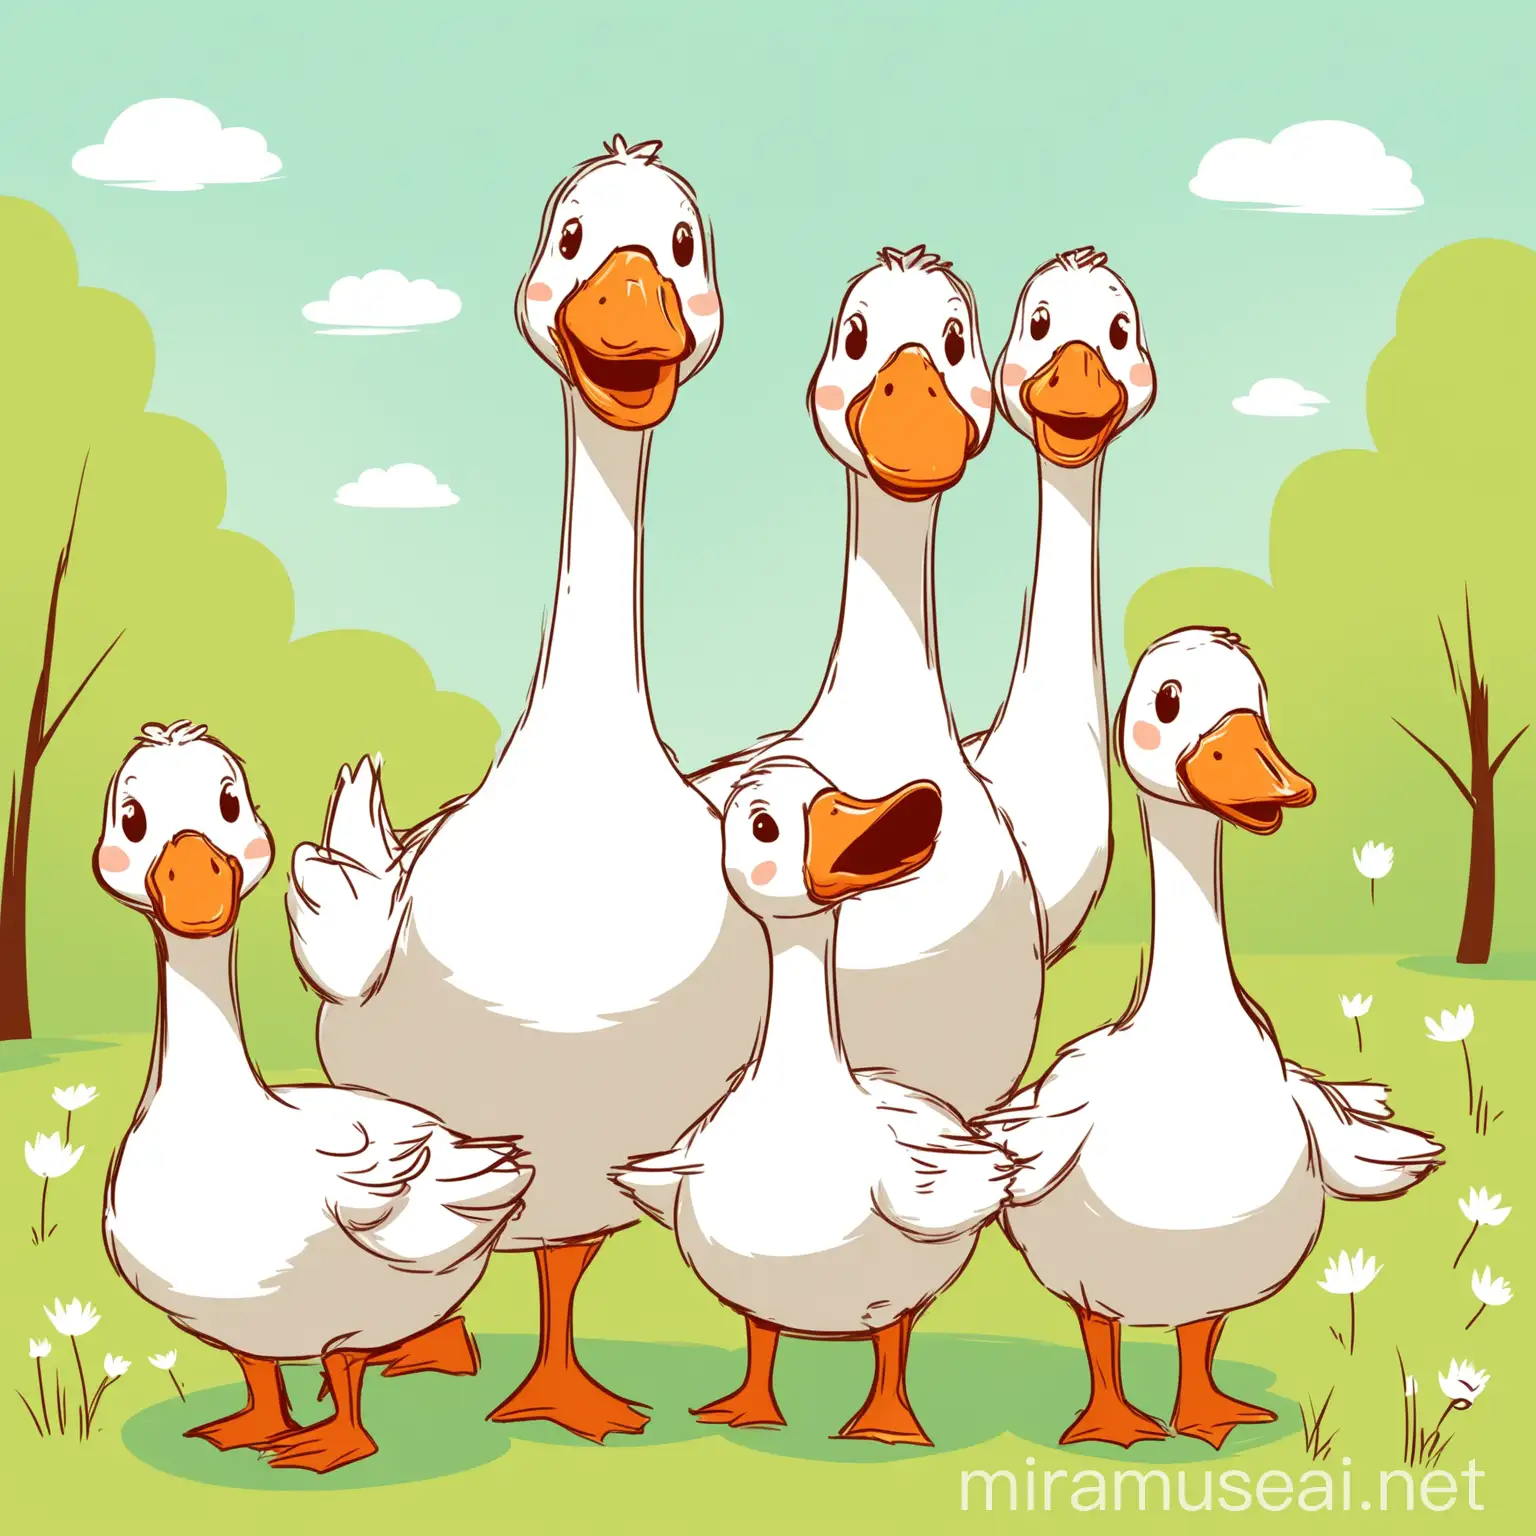 Playful and Happy Group of Geese with Goslings Frolicking Together